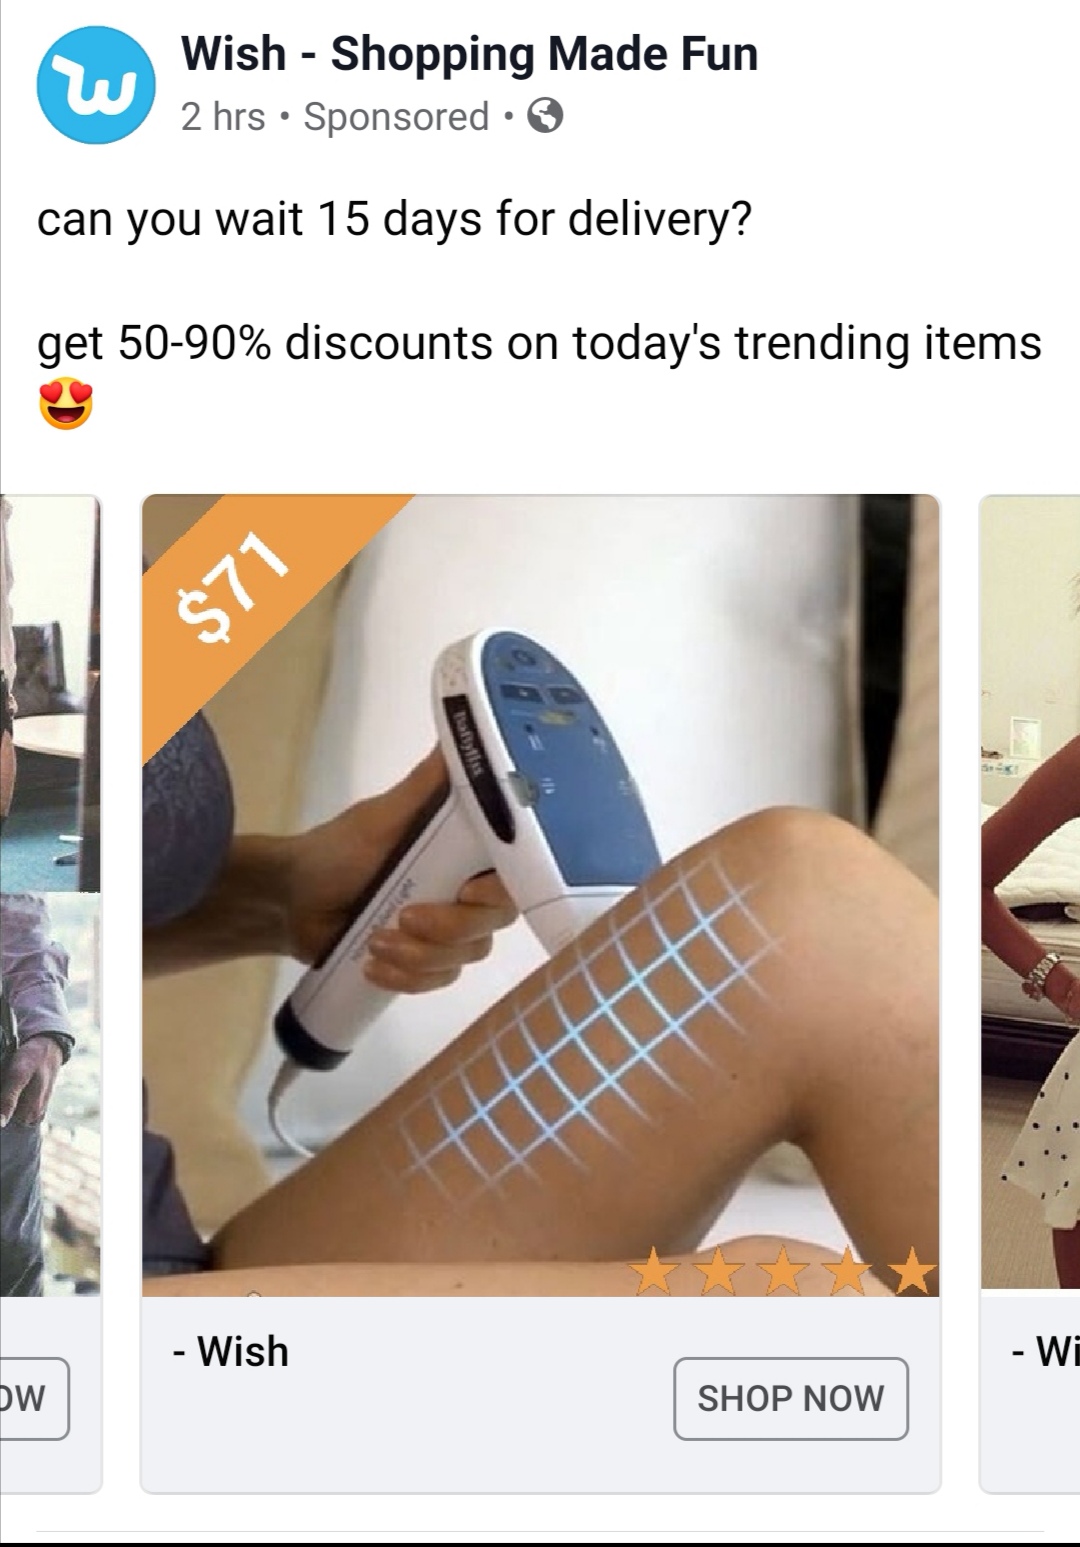 wish ads funny - Wish Shopping Made Fun 2 hrs Sponsored can you wait 15 days for delivery? get 5090% discounts on today's trending items $71 Wish Wi Dw Shop Now